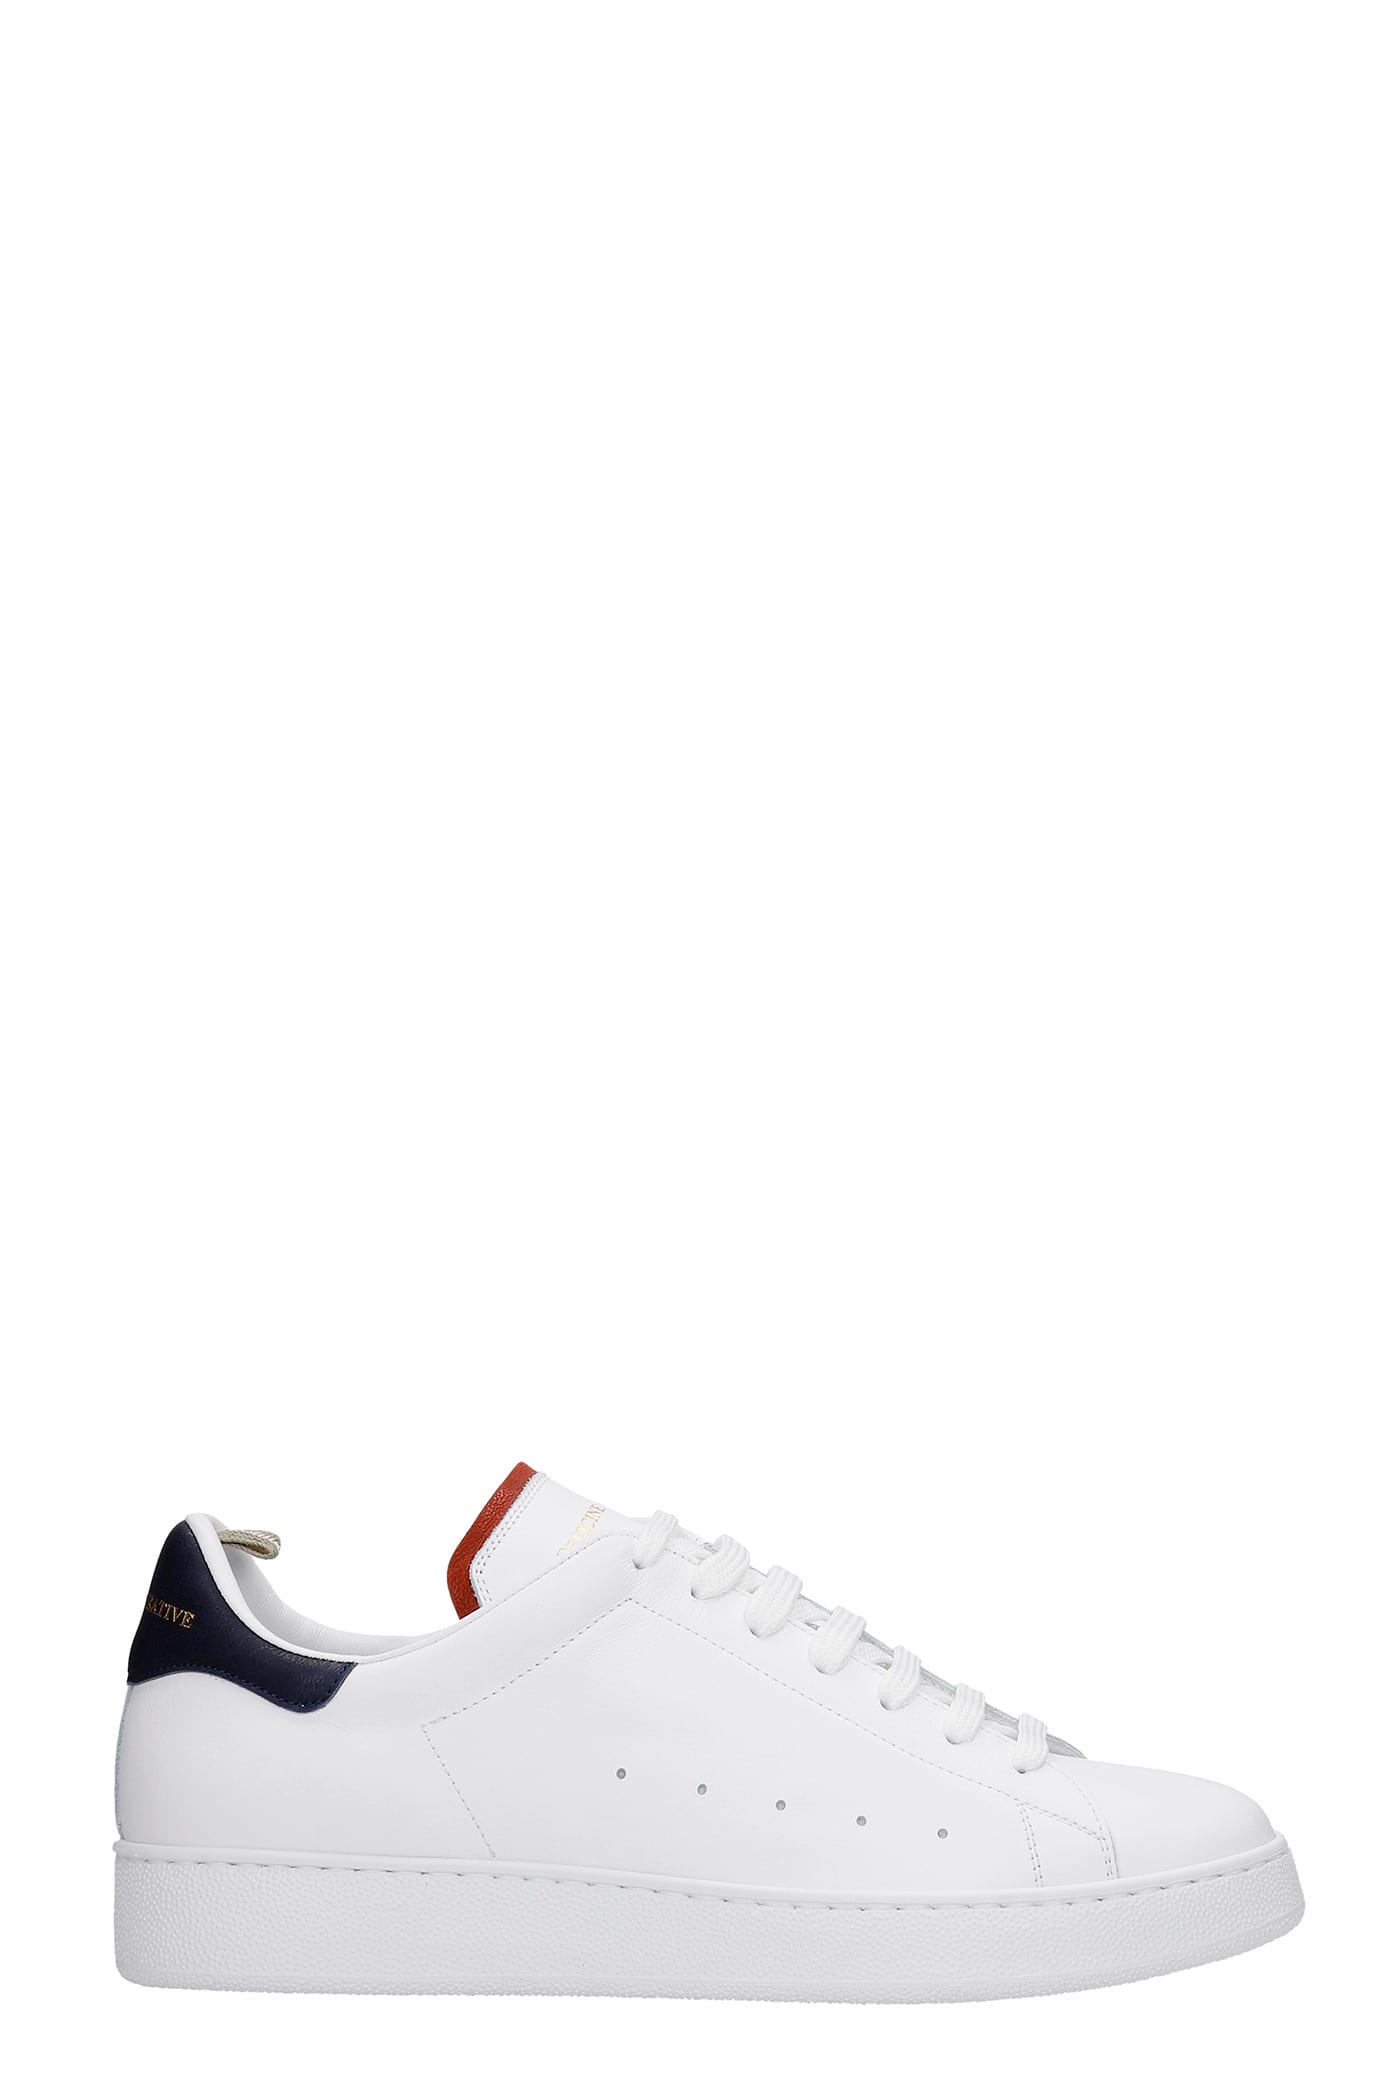 Officine Creative Mower 005 Sneakers In White Leather